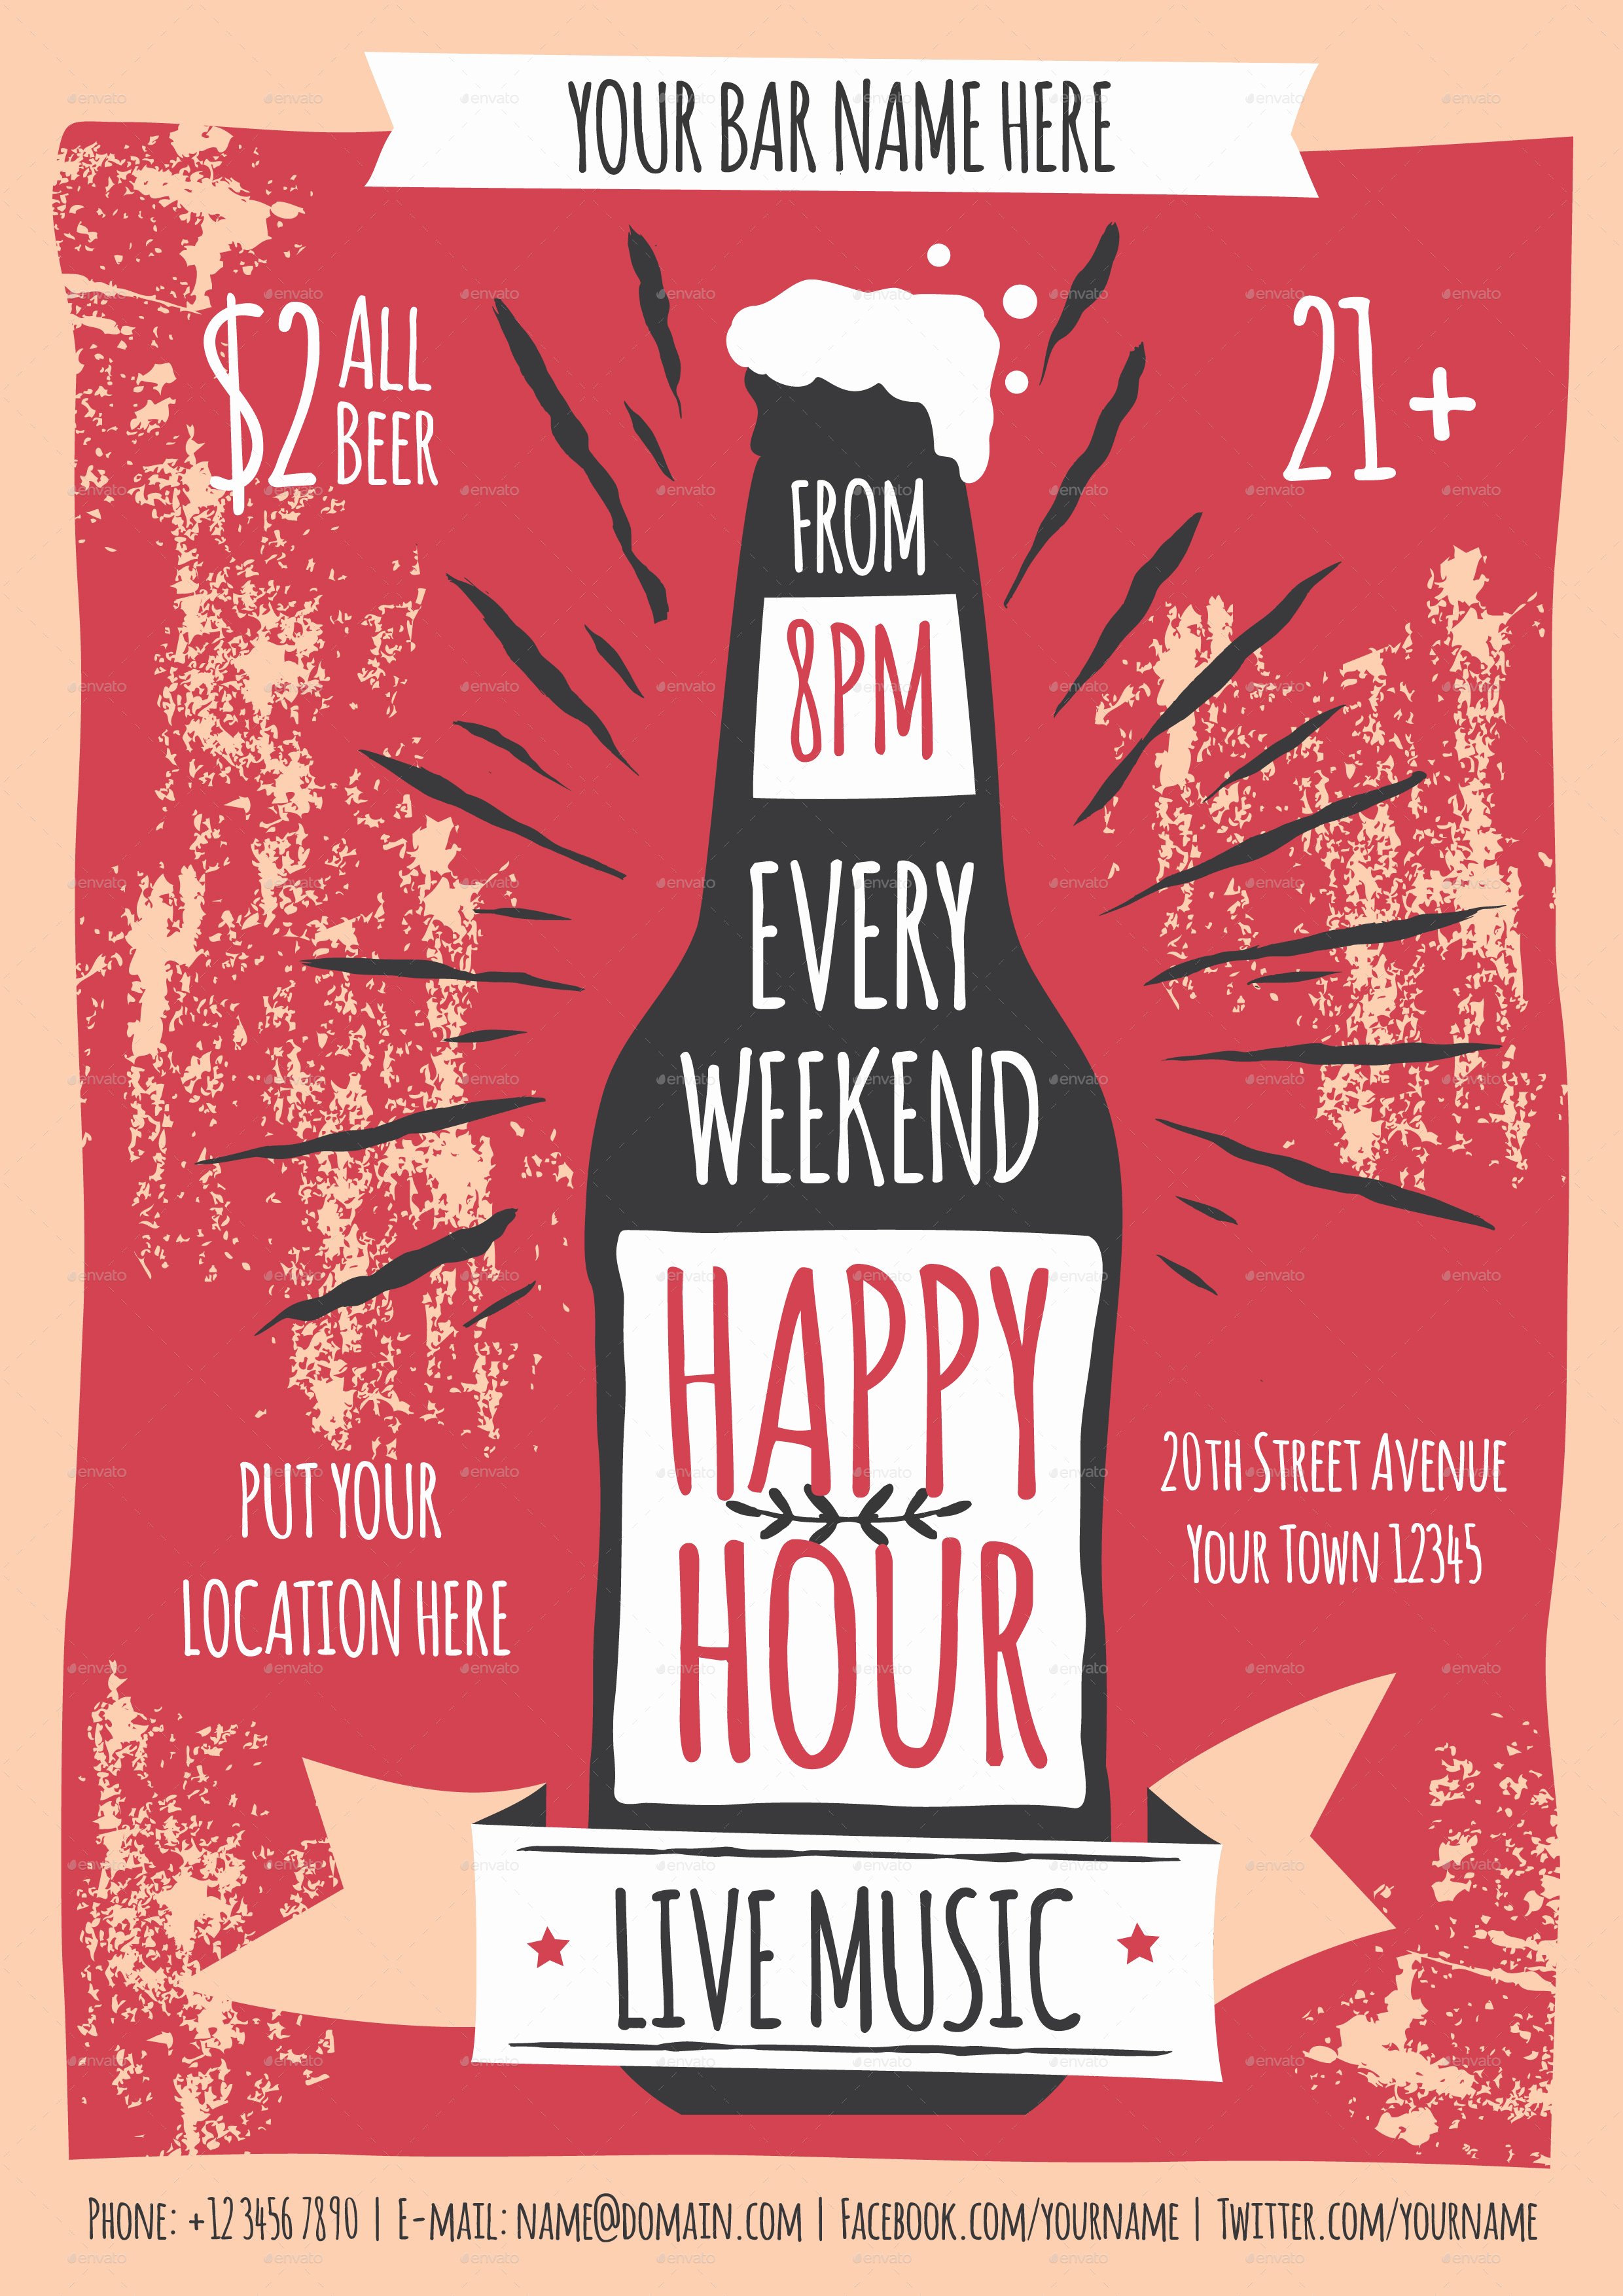 Happy Hour Invite Template Awesome Happy Hour Flyer Template by Meenj with Happy Hour Invites